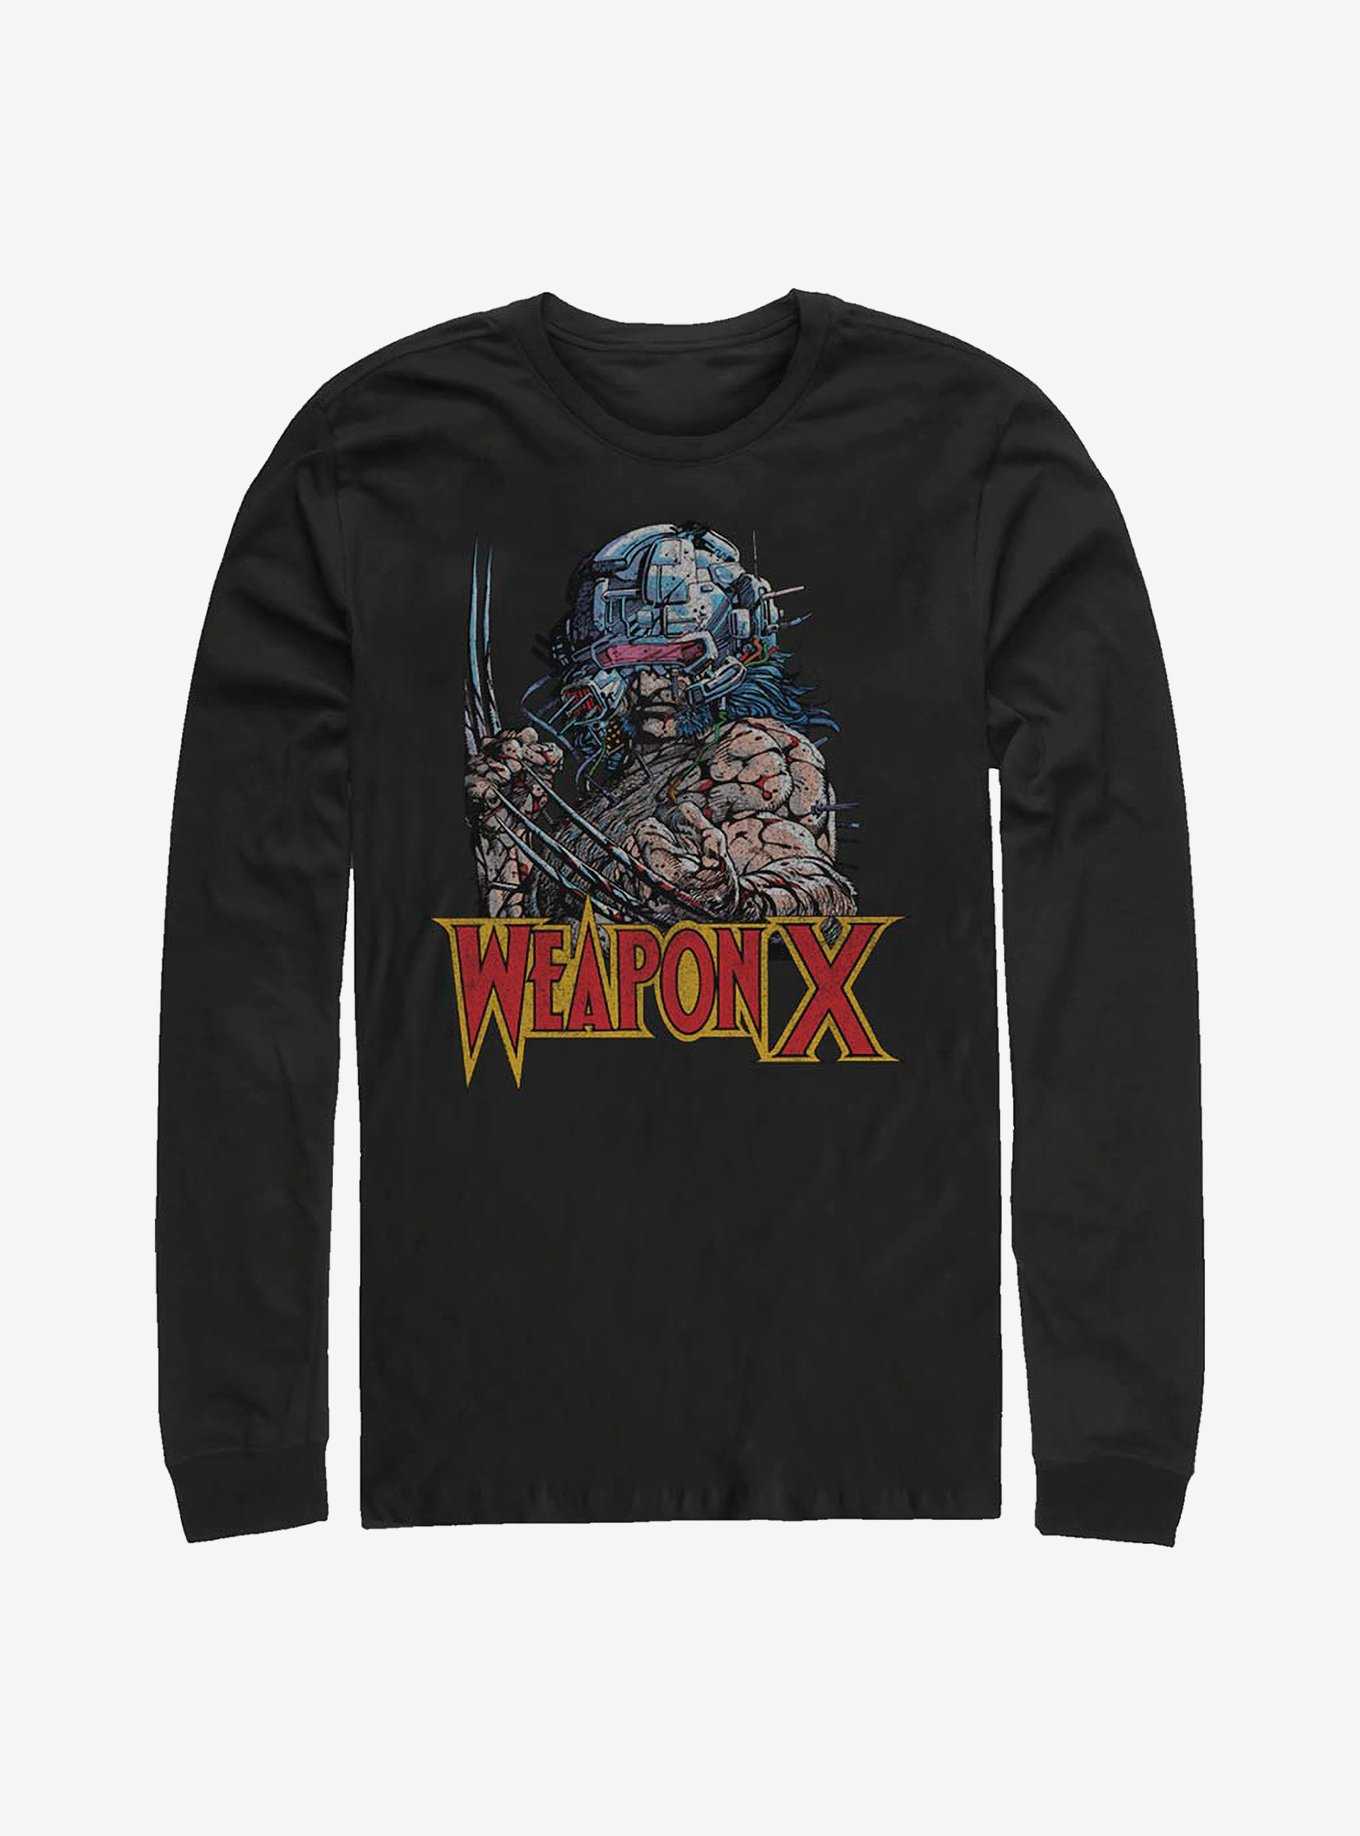 Marvel Wolverine Weapon X Long-Sleeve T-Shirt, , hi-res